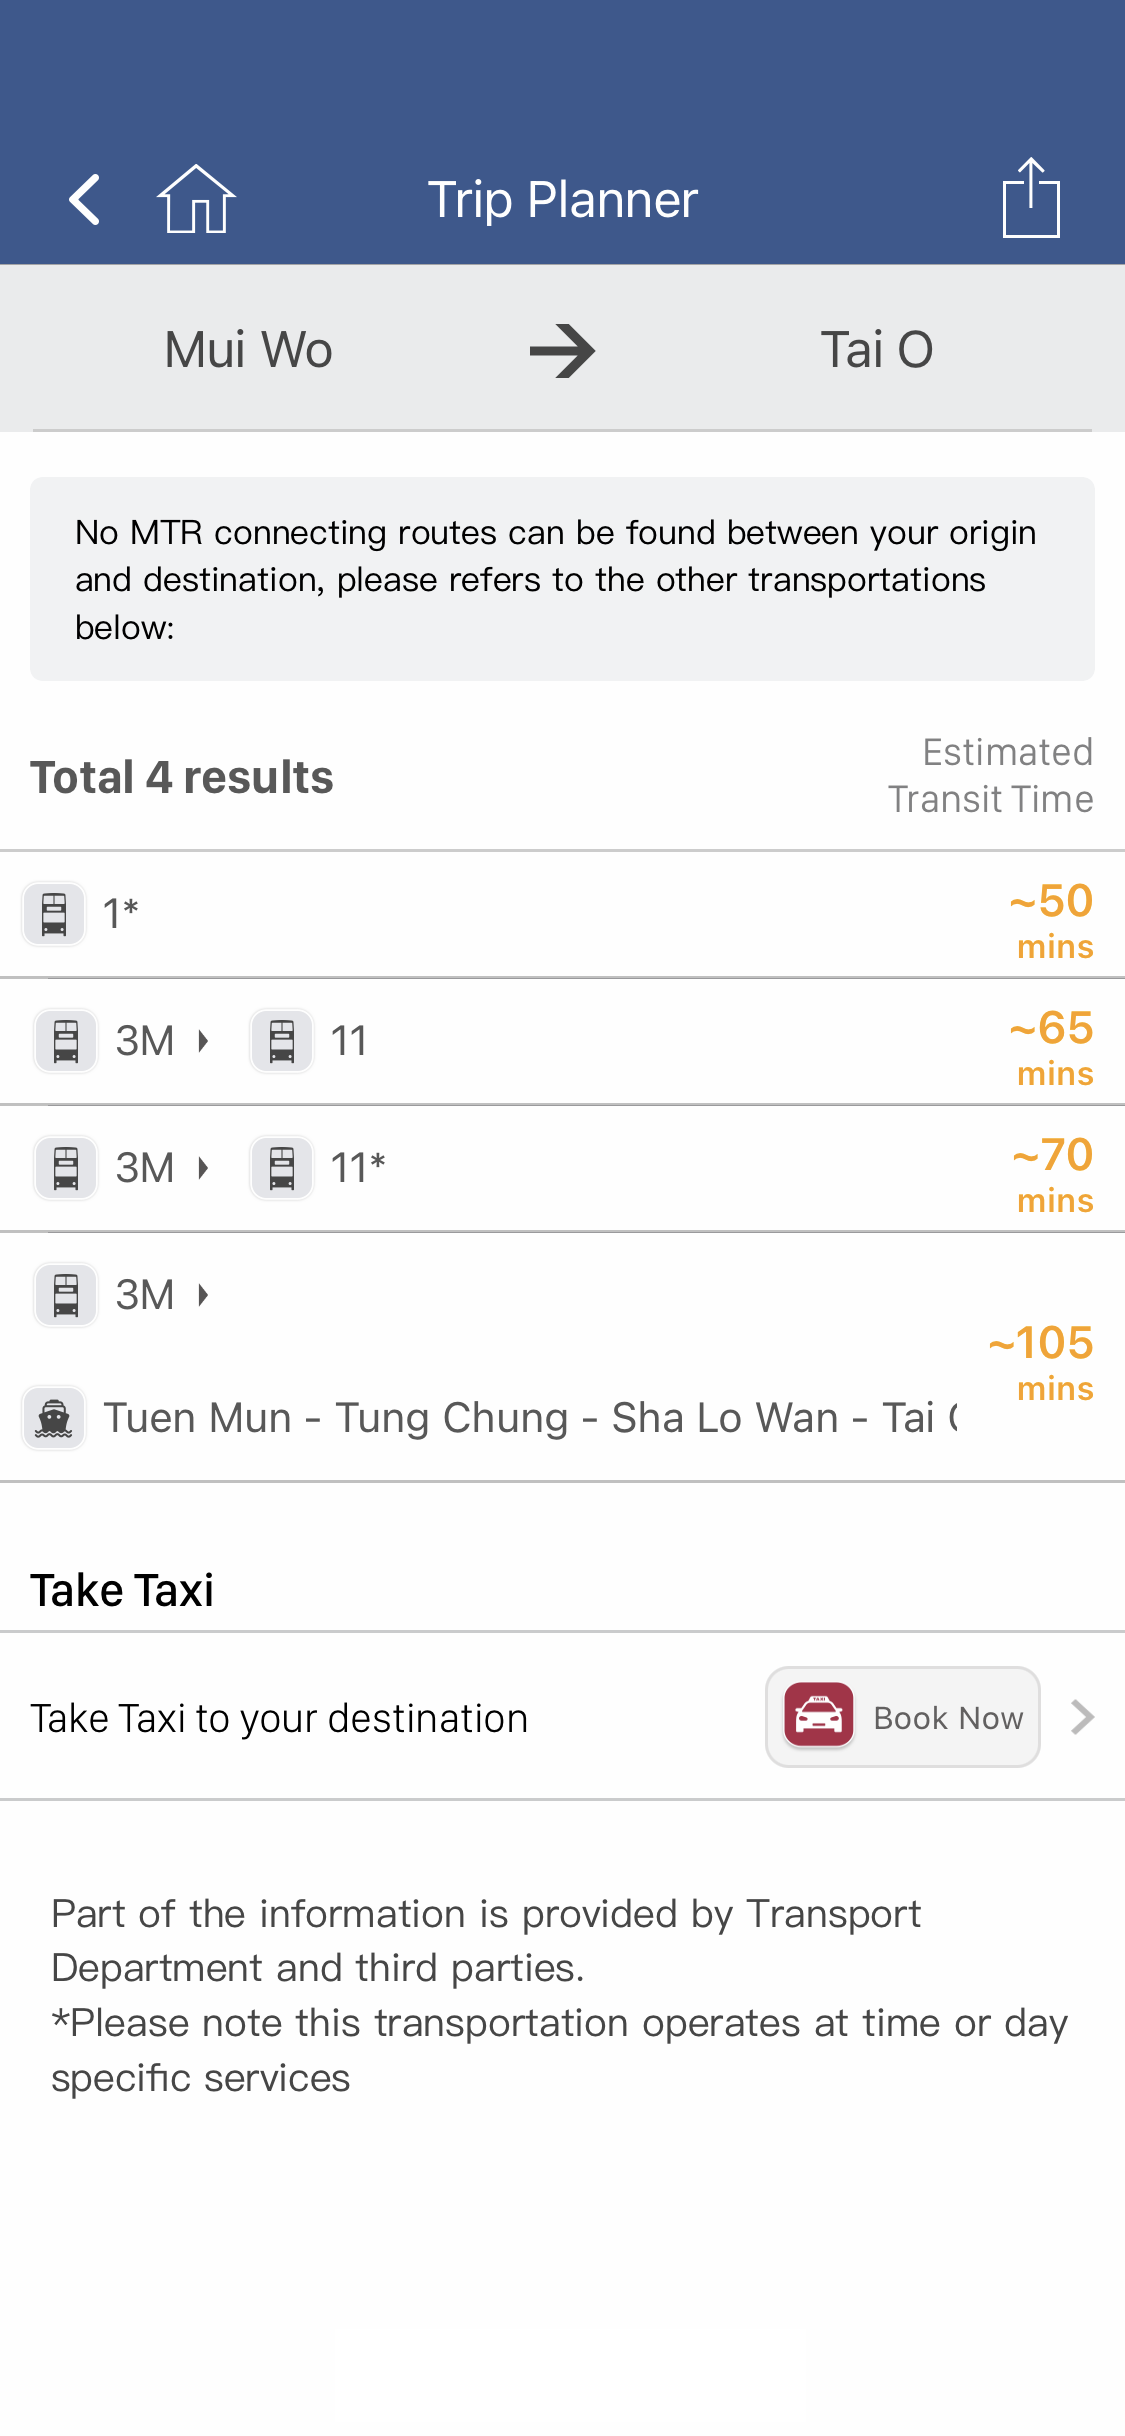 If the searched route is not covered by the MTR network, the function will provide alternative routes using other public transportation and Taxi as Feeder option